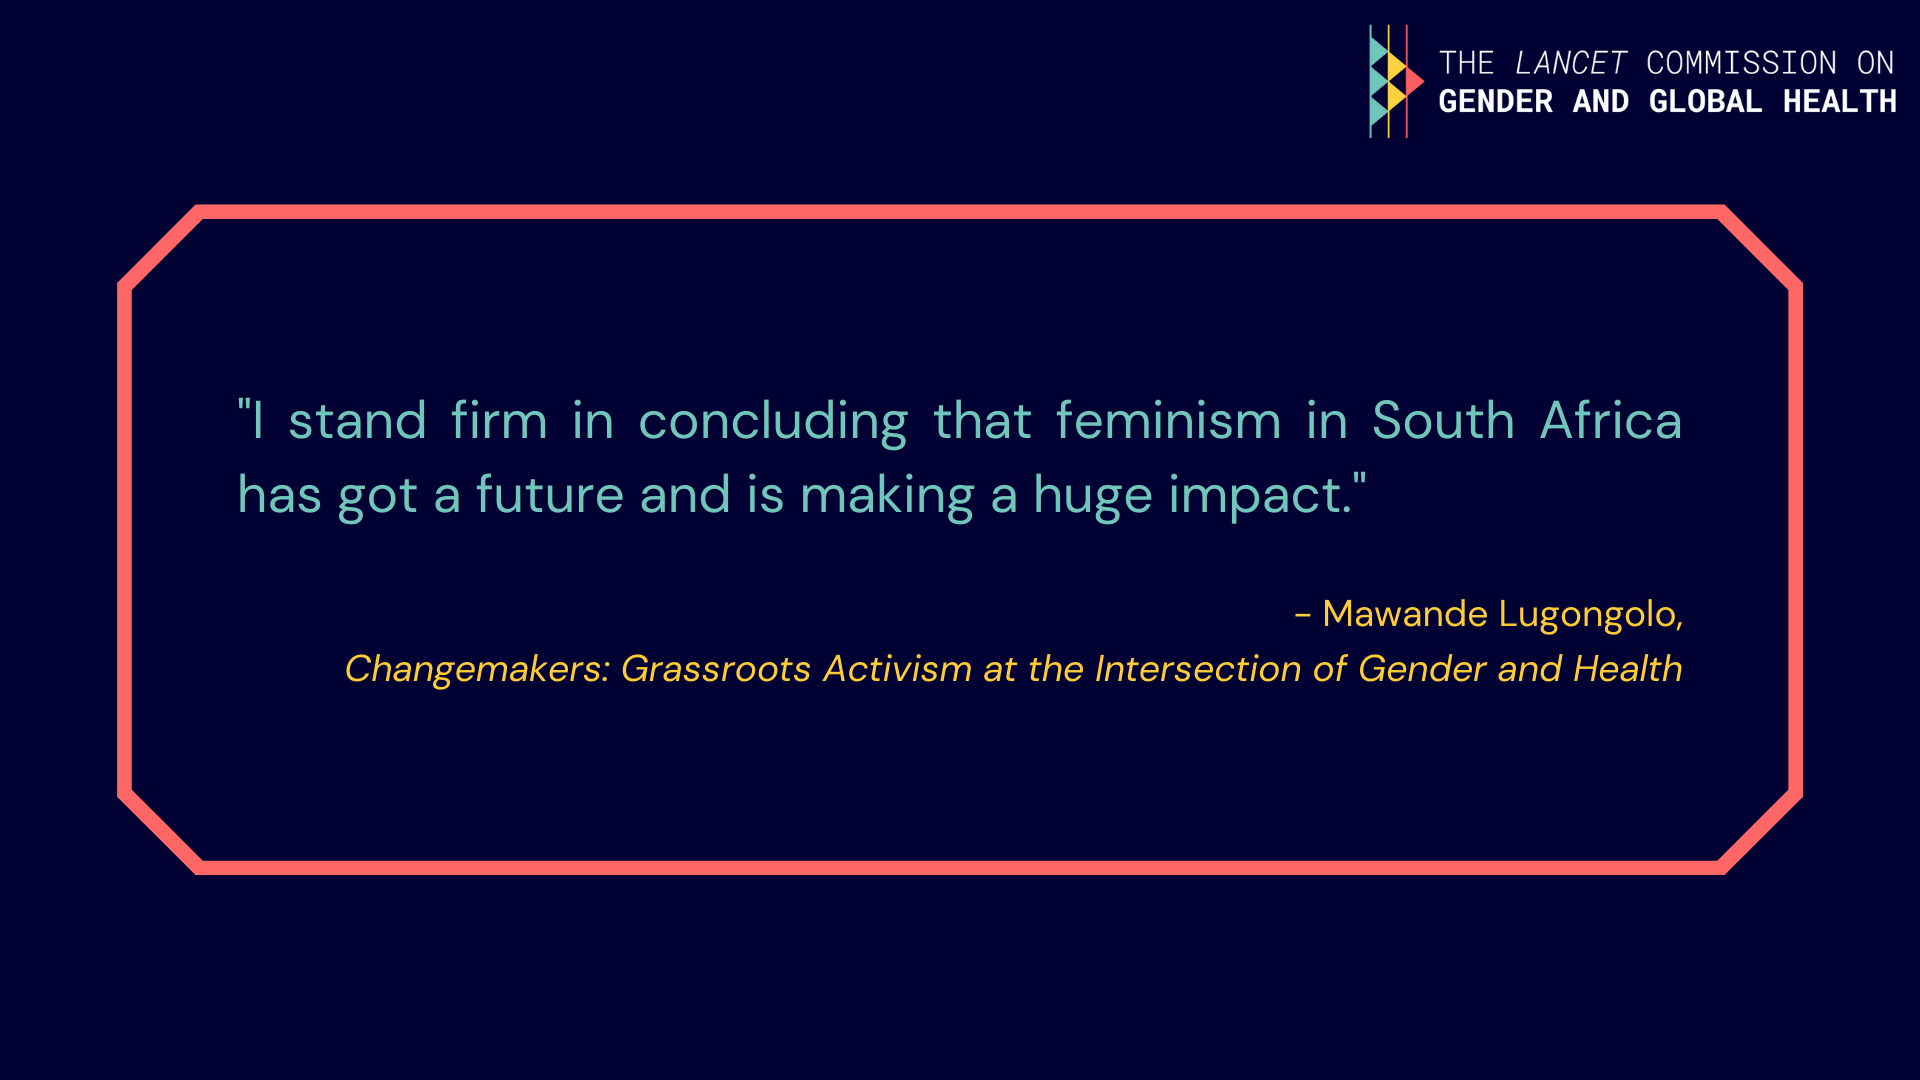 Quote from Mawande Lugongolo: "I stand firm in concluding that feminism in South Africa has got a future and is making a huge impact".